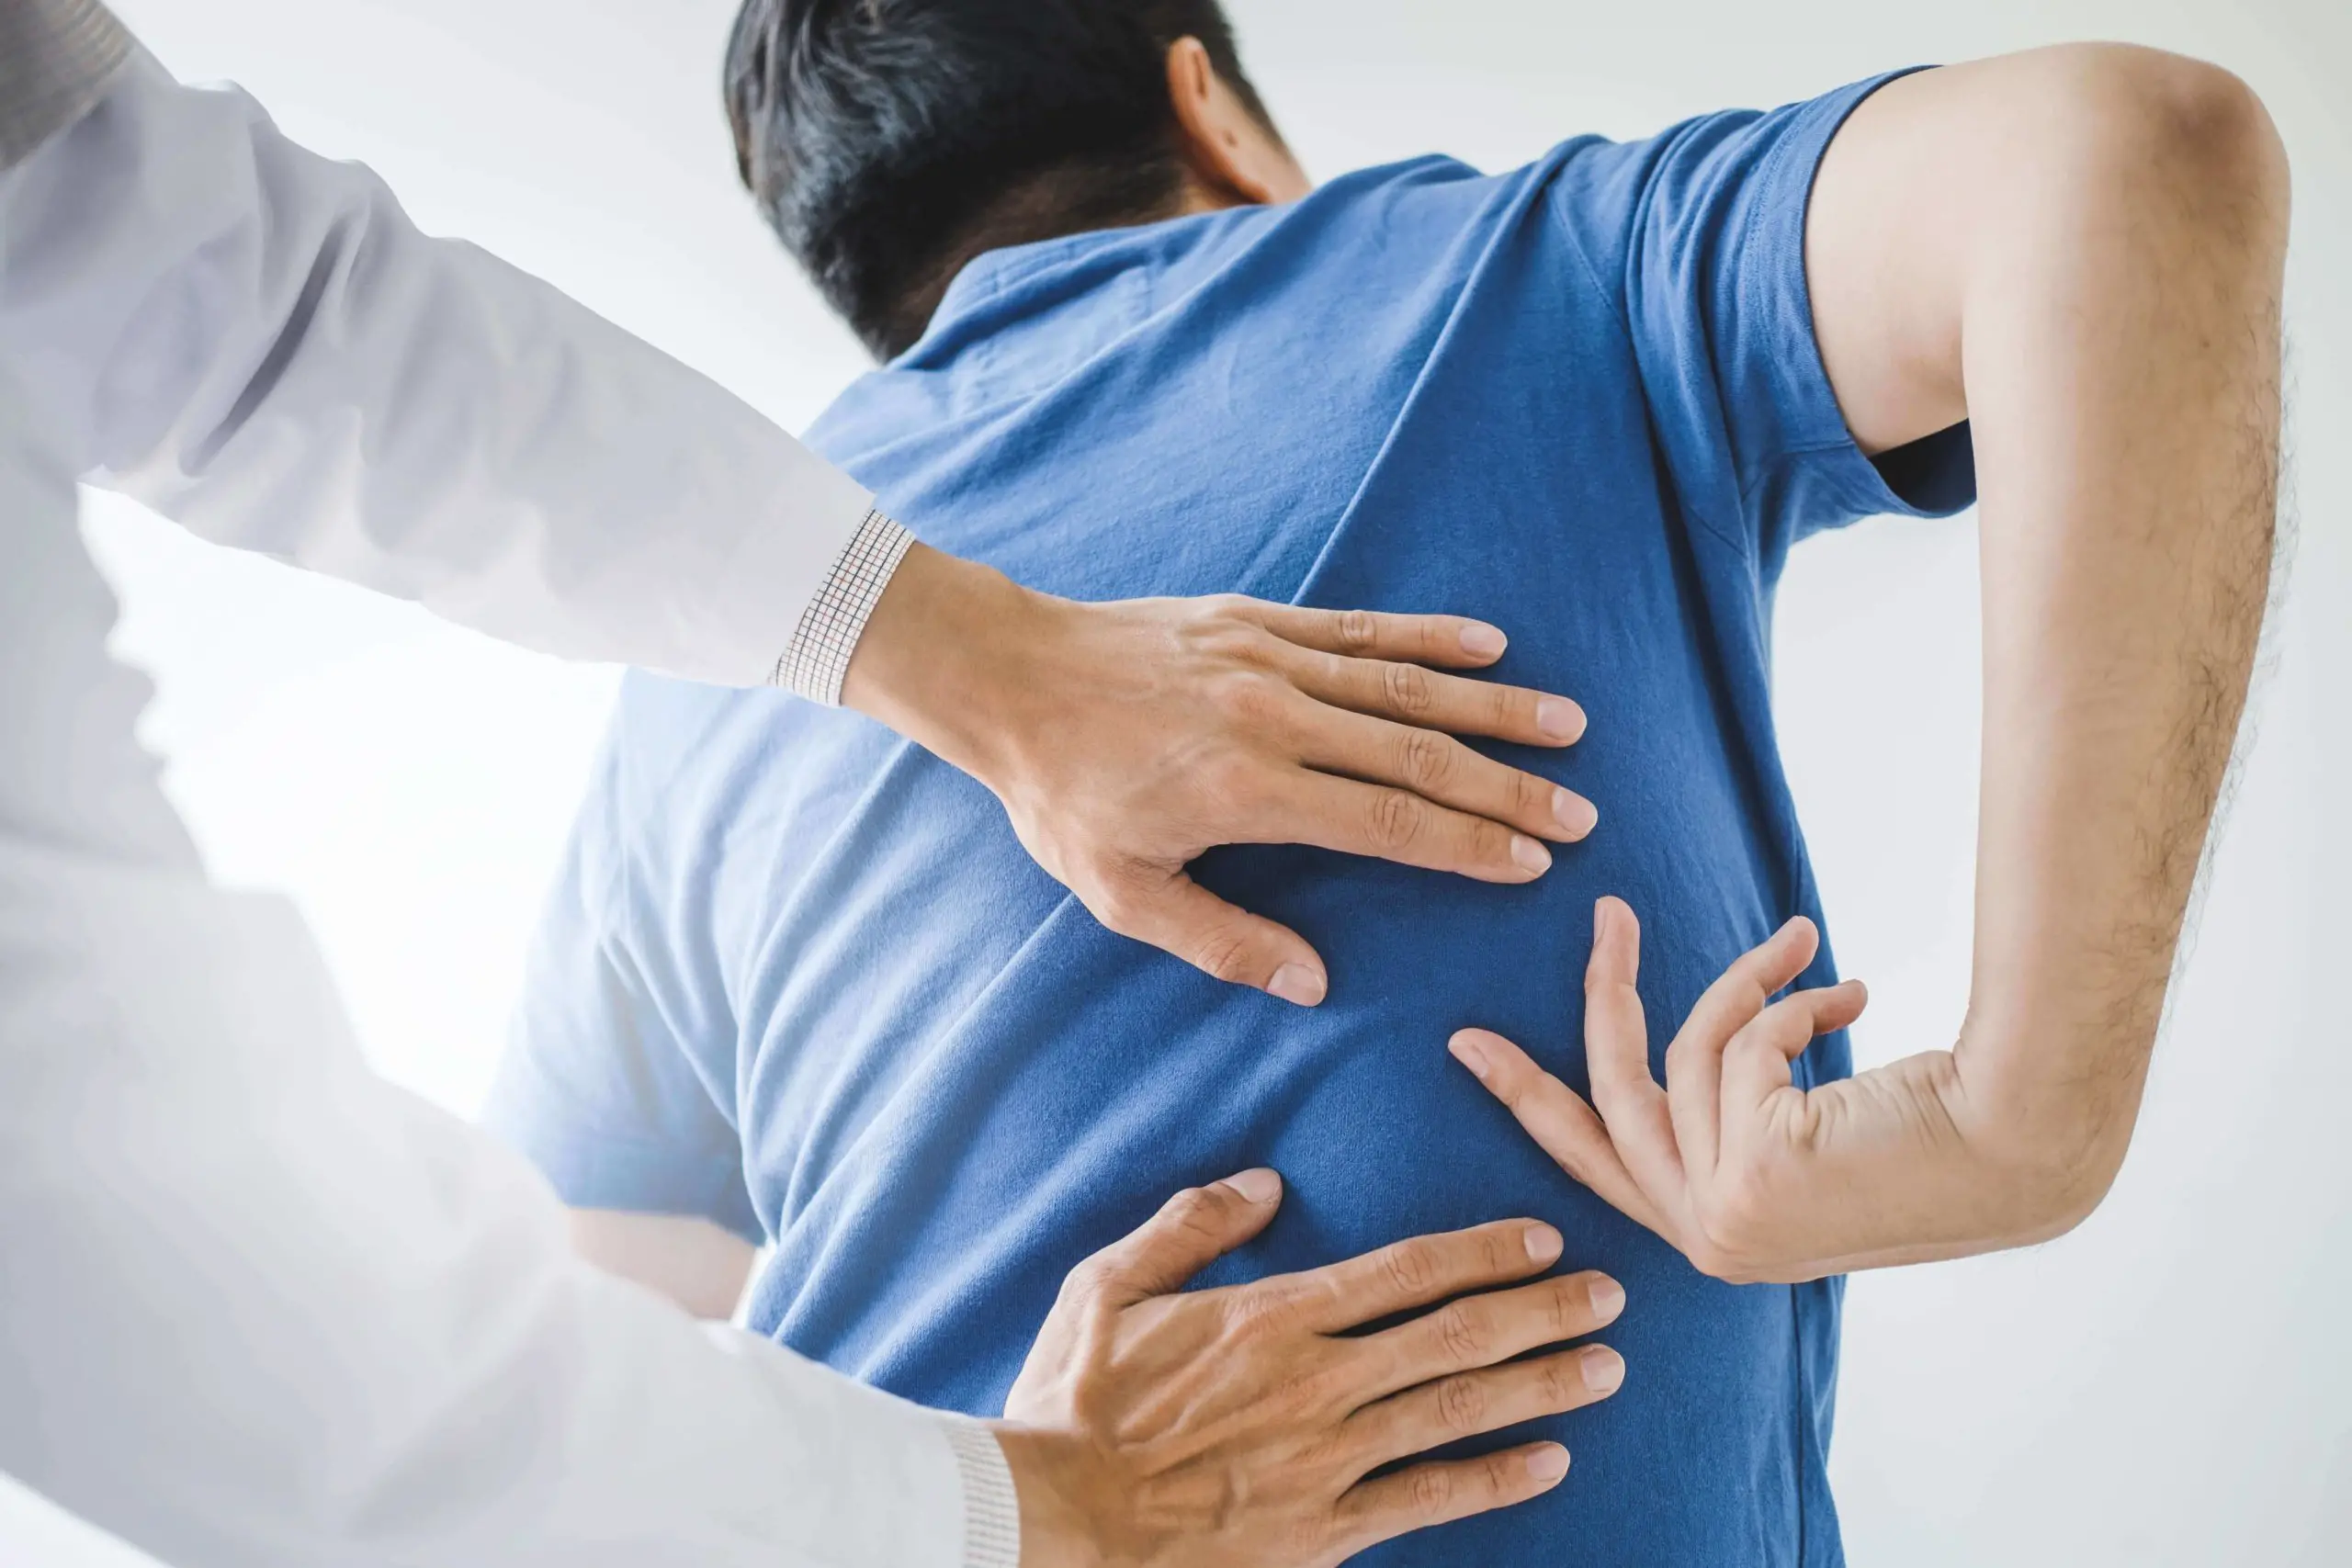 What to Expect During Physical Therapy for Lower Back Pain